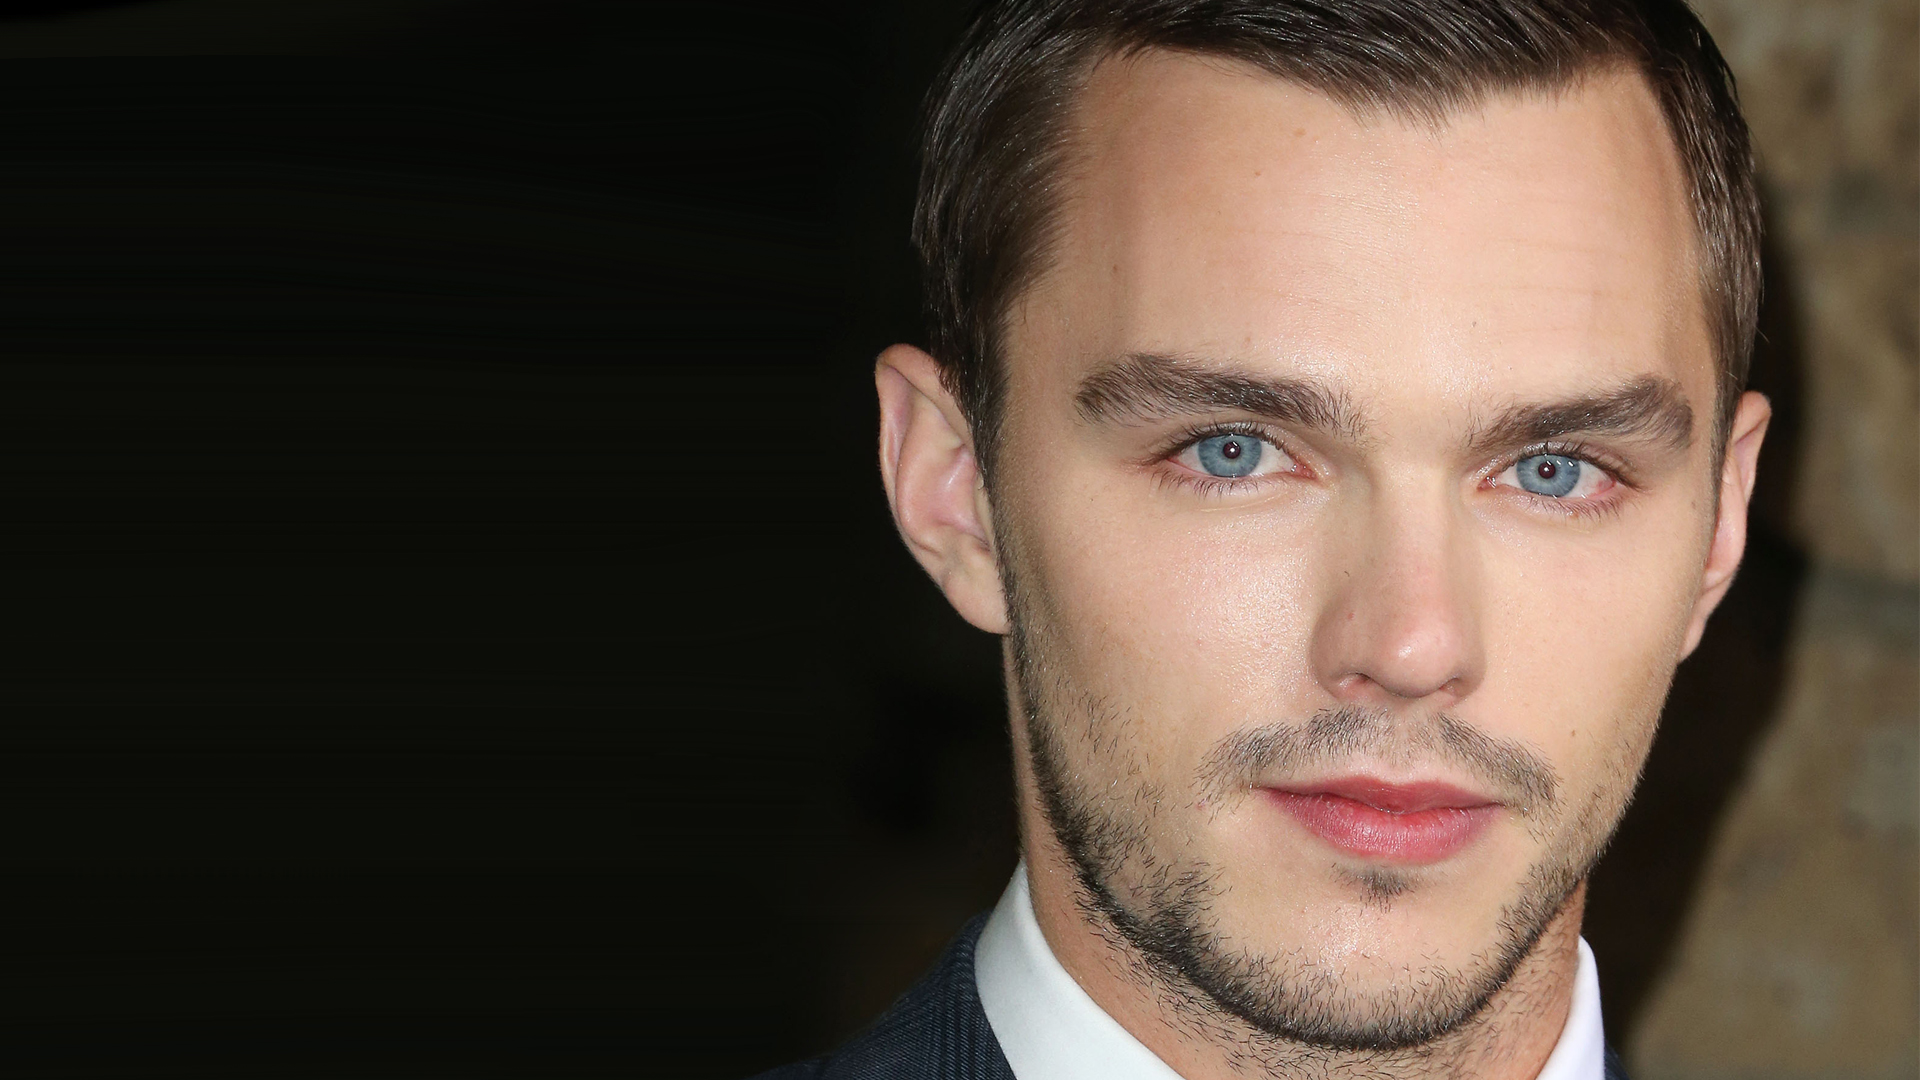 HD Nicholas Hoult Wallpapers 1 HdCoolWallpapers.Com